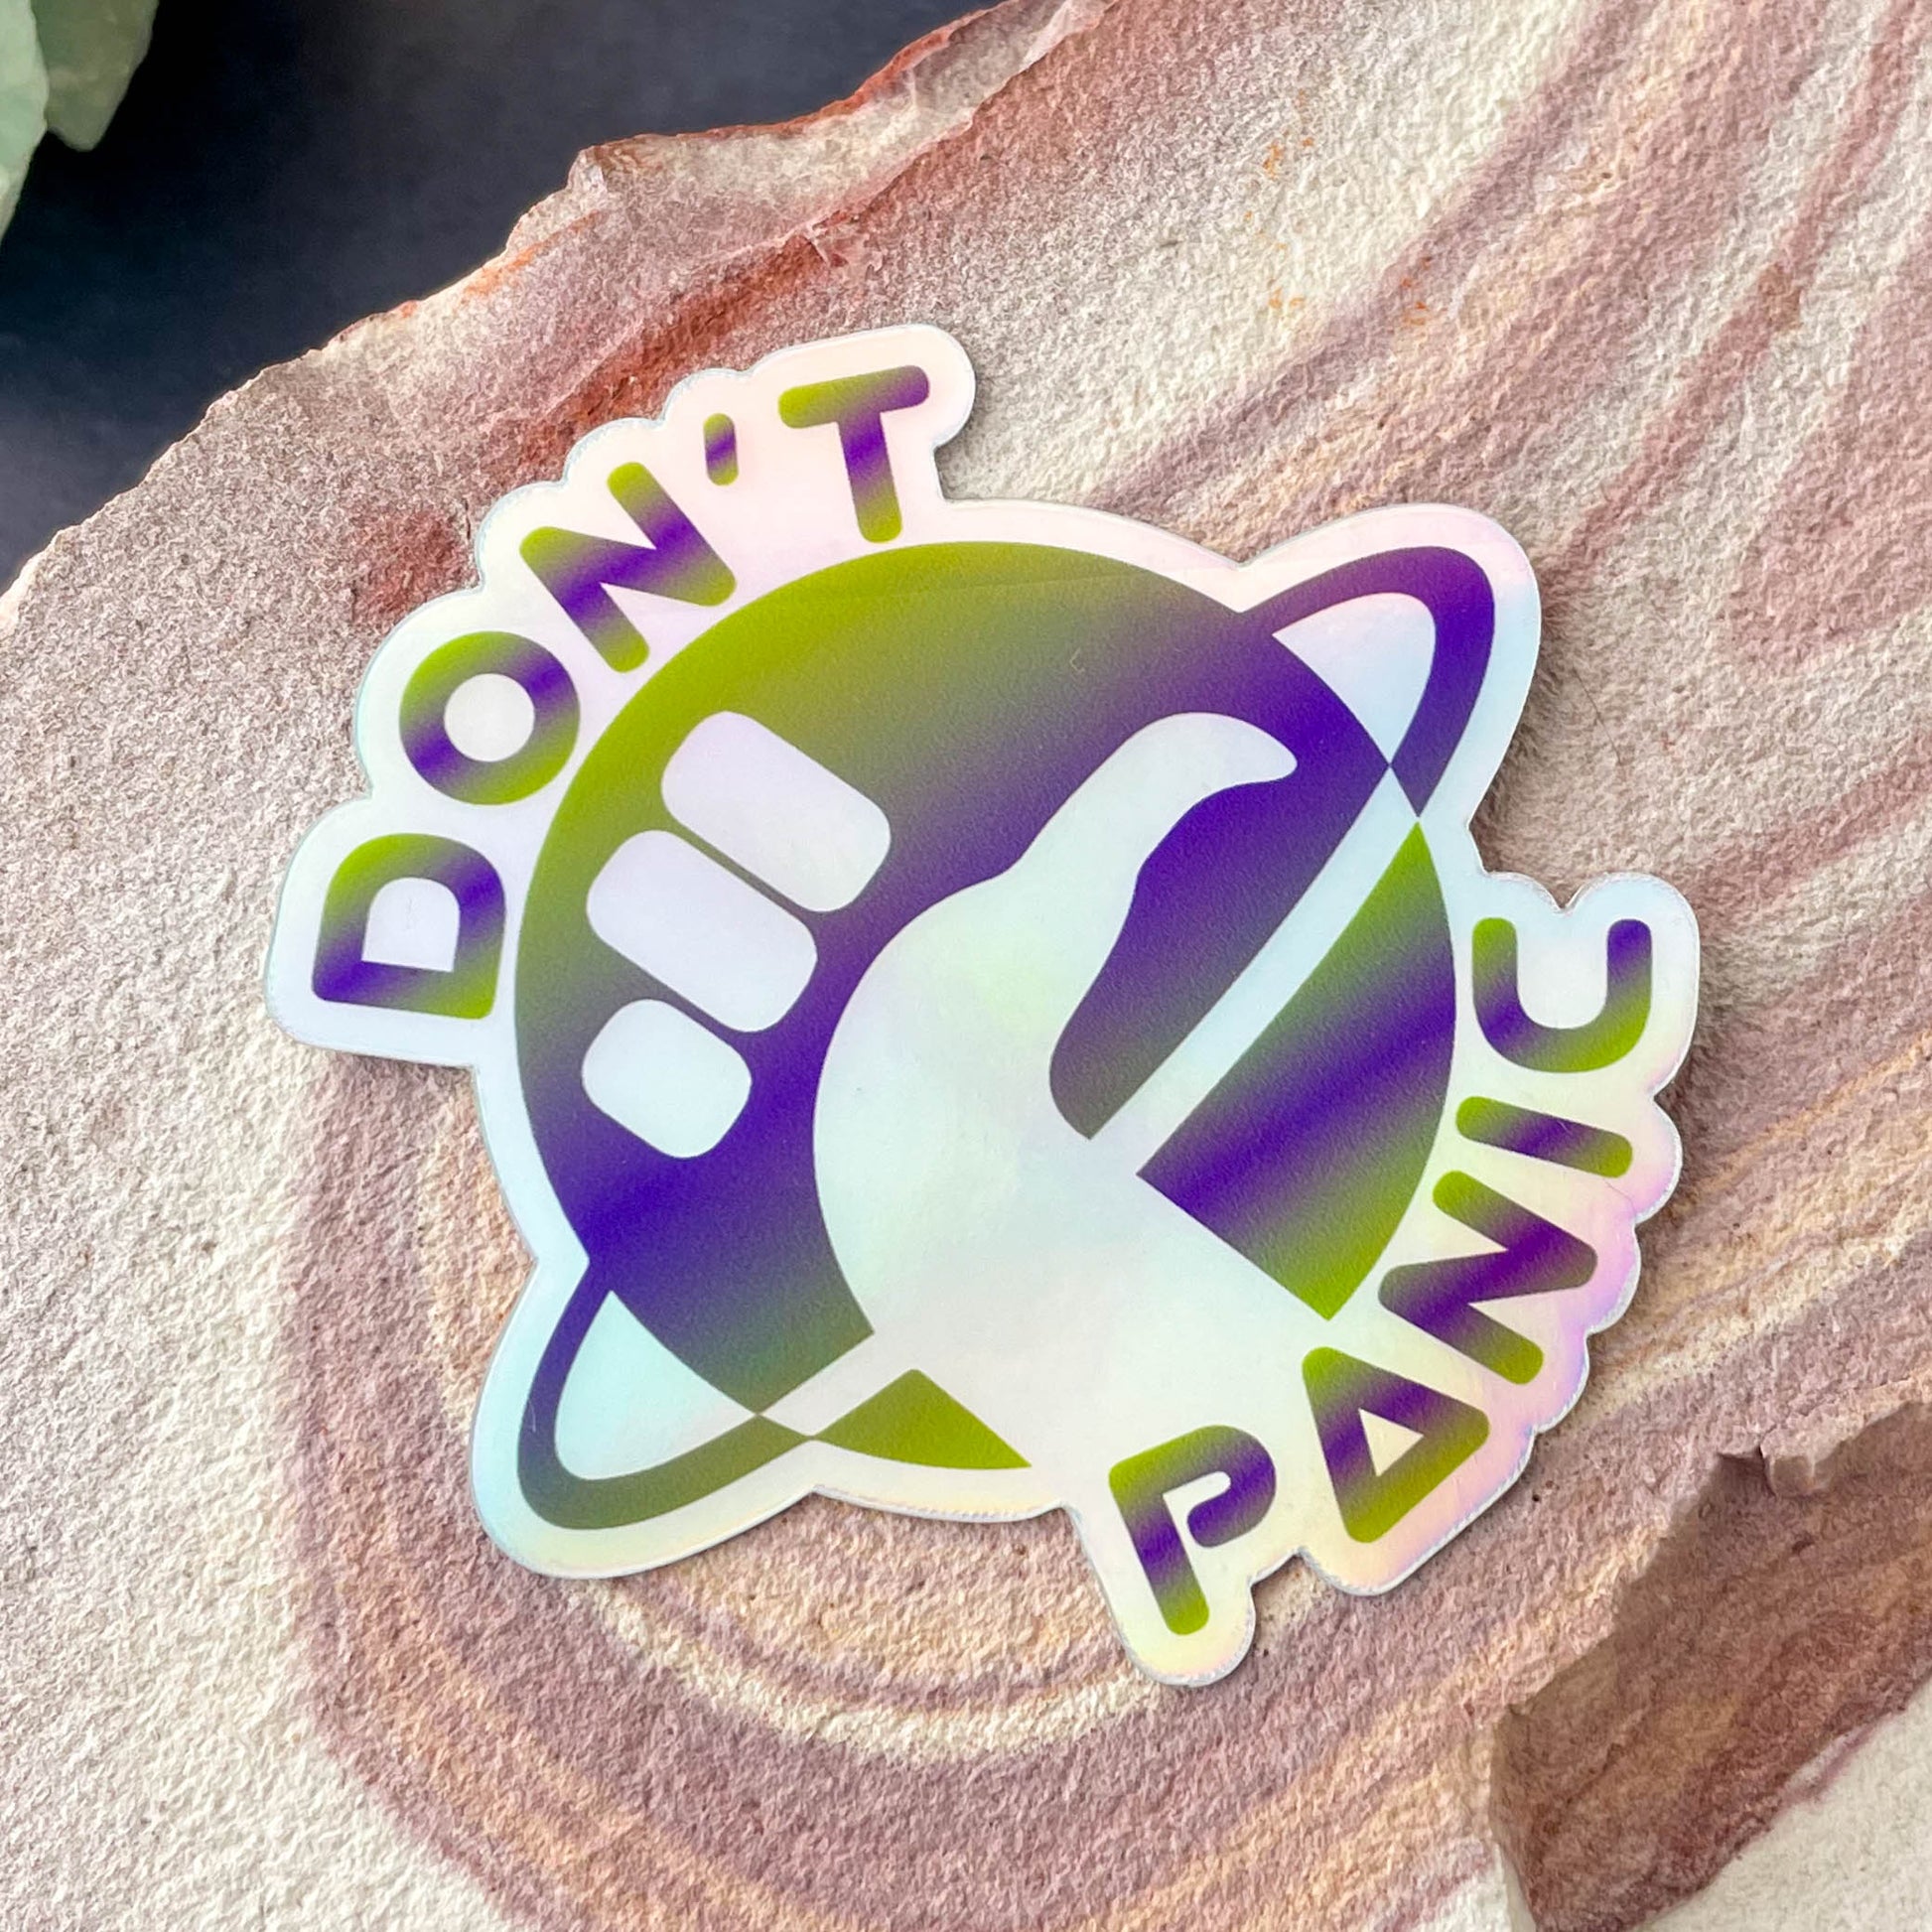 Don't Panic Holographic 3" Sticker on rock